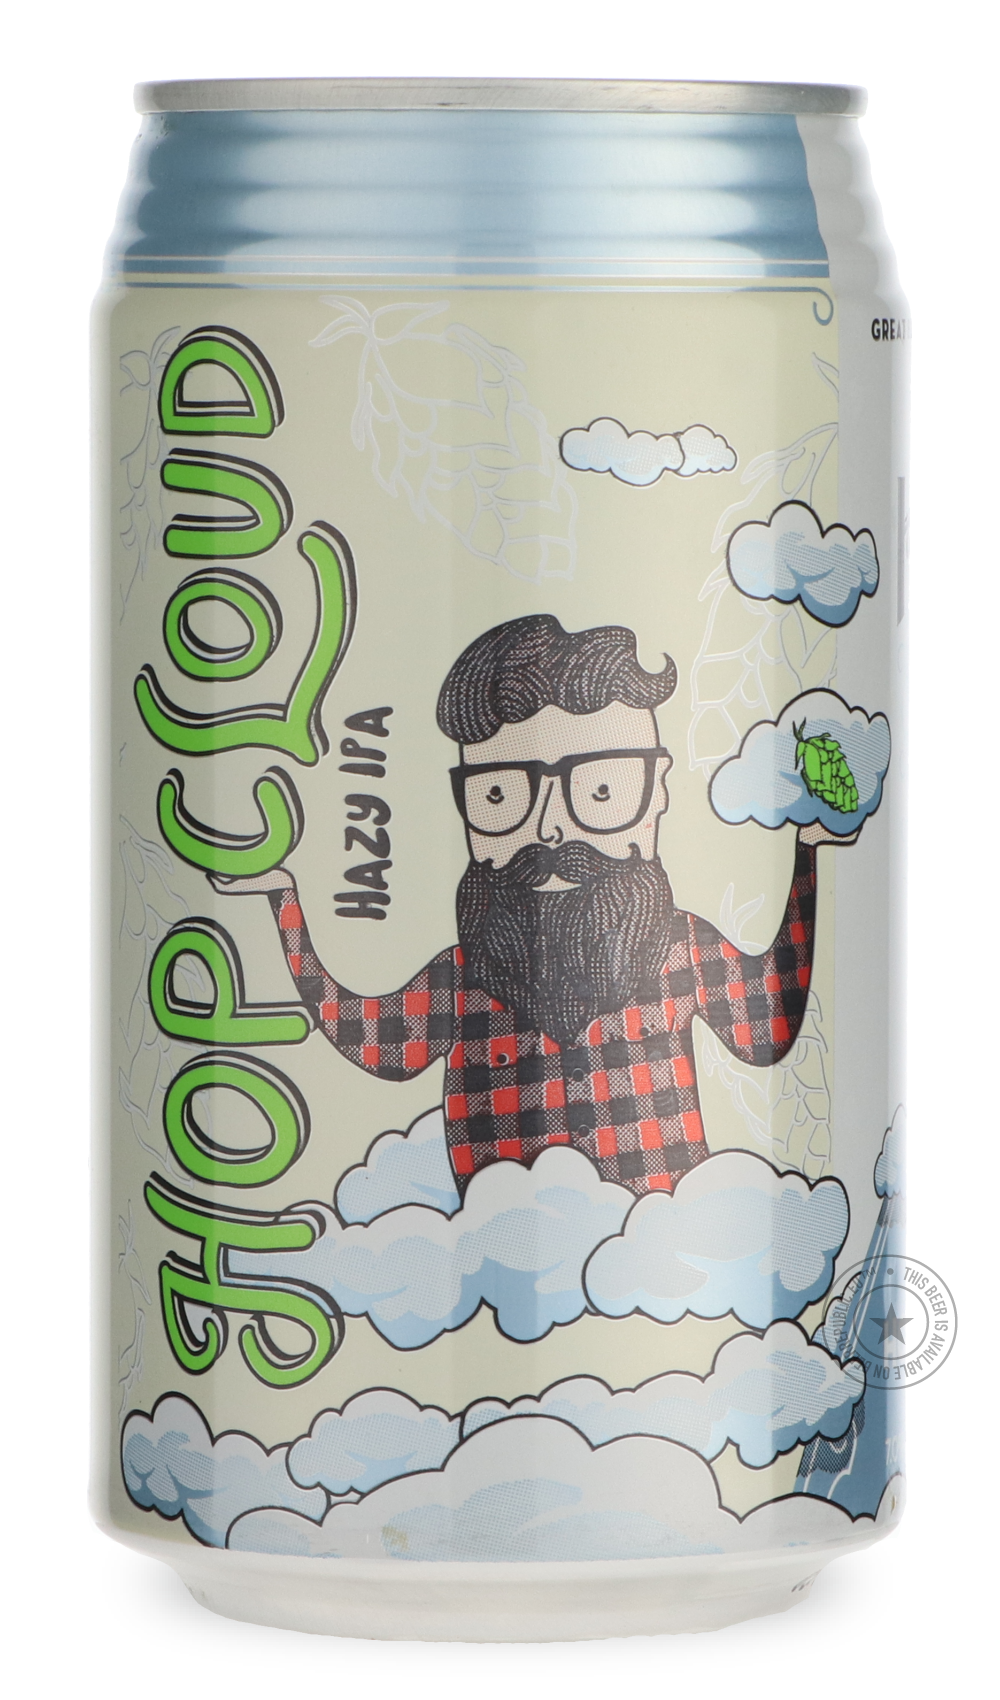 -Mike Hess- Hop Cloud-IPA- Only @ Beer Republic - The best online beer store for American & Canadian craft beer - Buy beer online from the USA and Canada - Bier online kopen - Amerikaans bier kopen - Craft beer store - Craft beer kopen - Amerikanisch bier kaufen - Bier online kaufen - Acheter biere online - IPA - Stout - Porter - New England IPA - Hazy IPA - Imperial Stout - Barrel Aged - Barrel Aged Imperial Stout - Brown - Dark beer - Blond - Blonde - Pilsner - Lager - Wheat - Weizen - Amber - Barley Wine